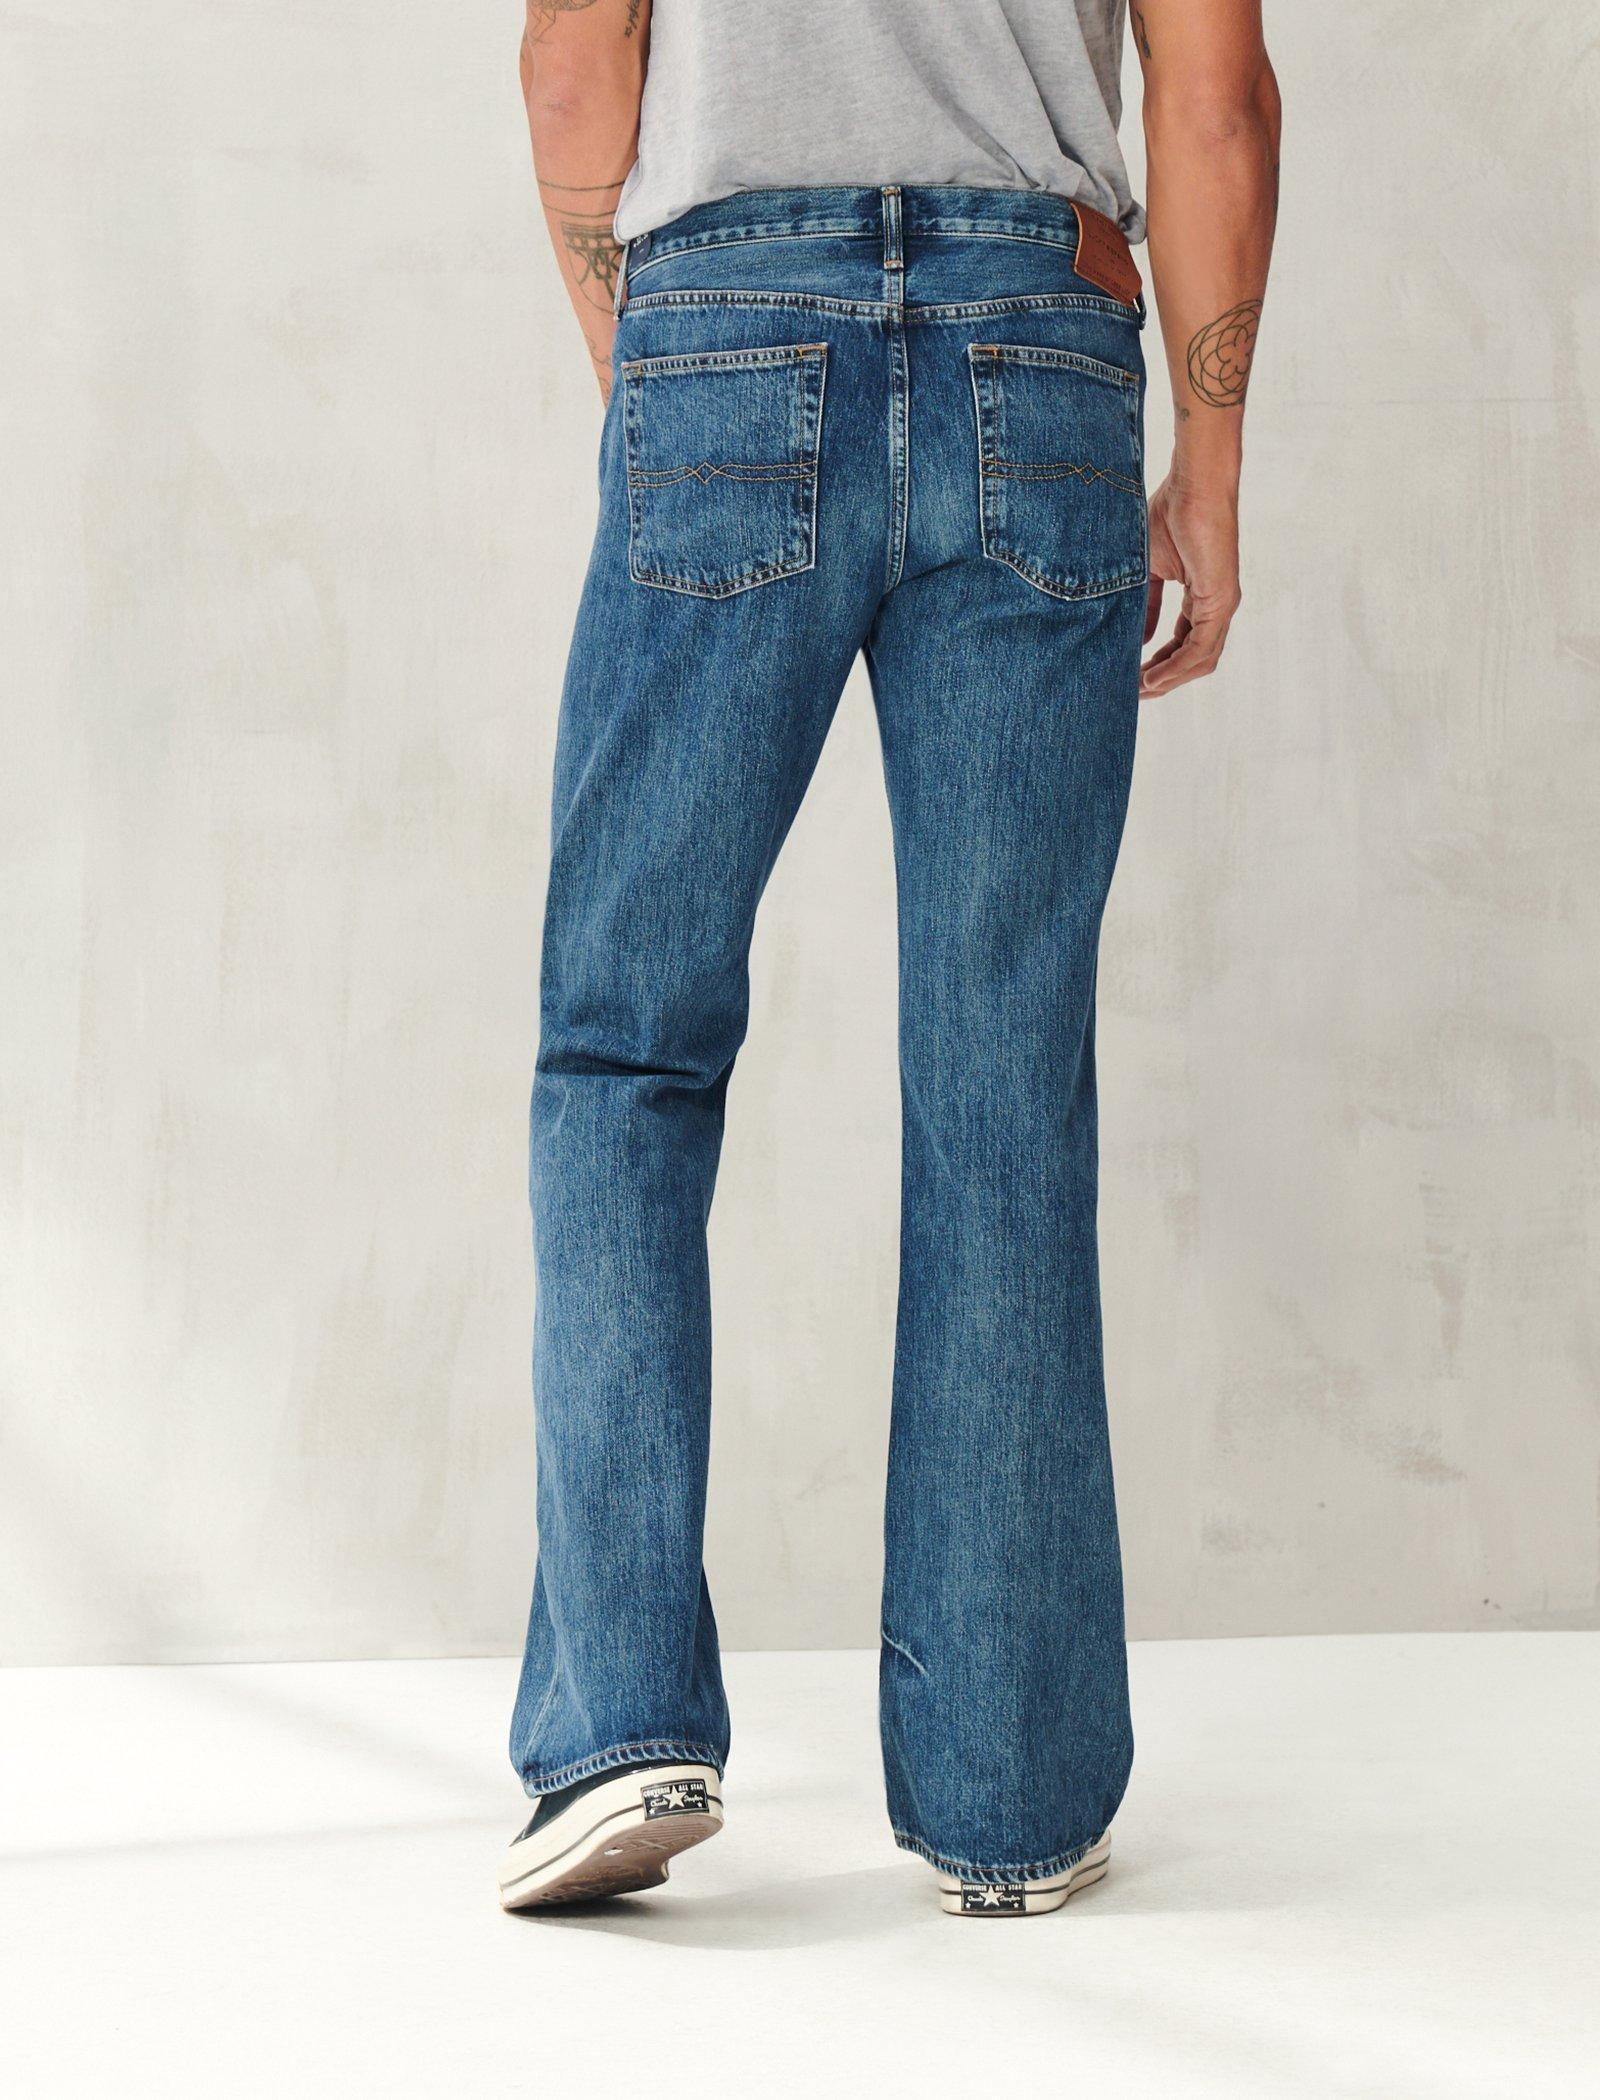 lucky brand 367 bootcut jeans